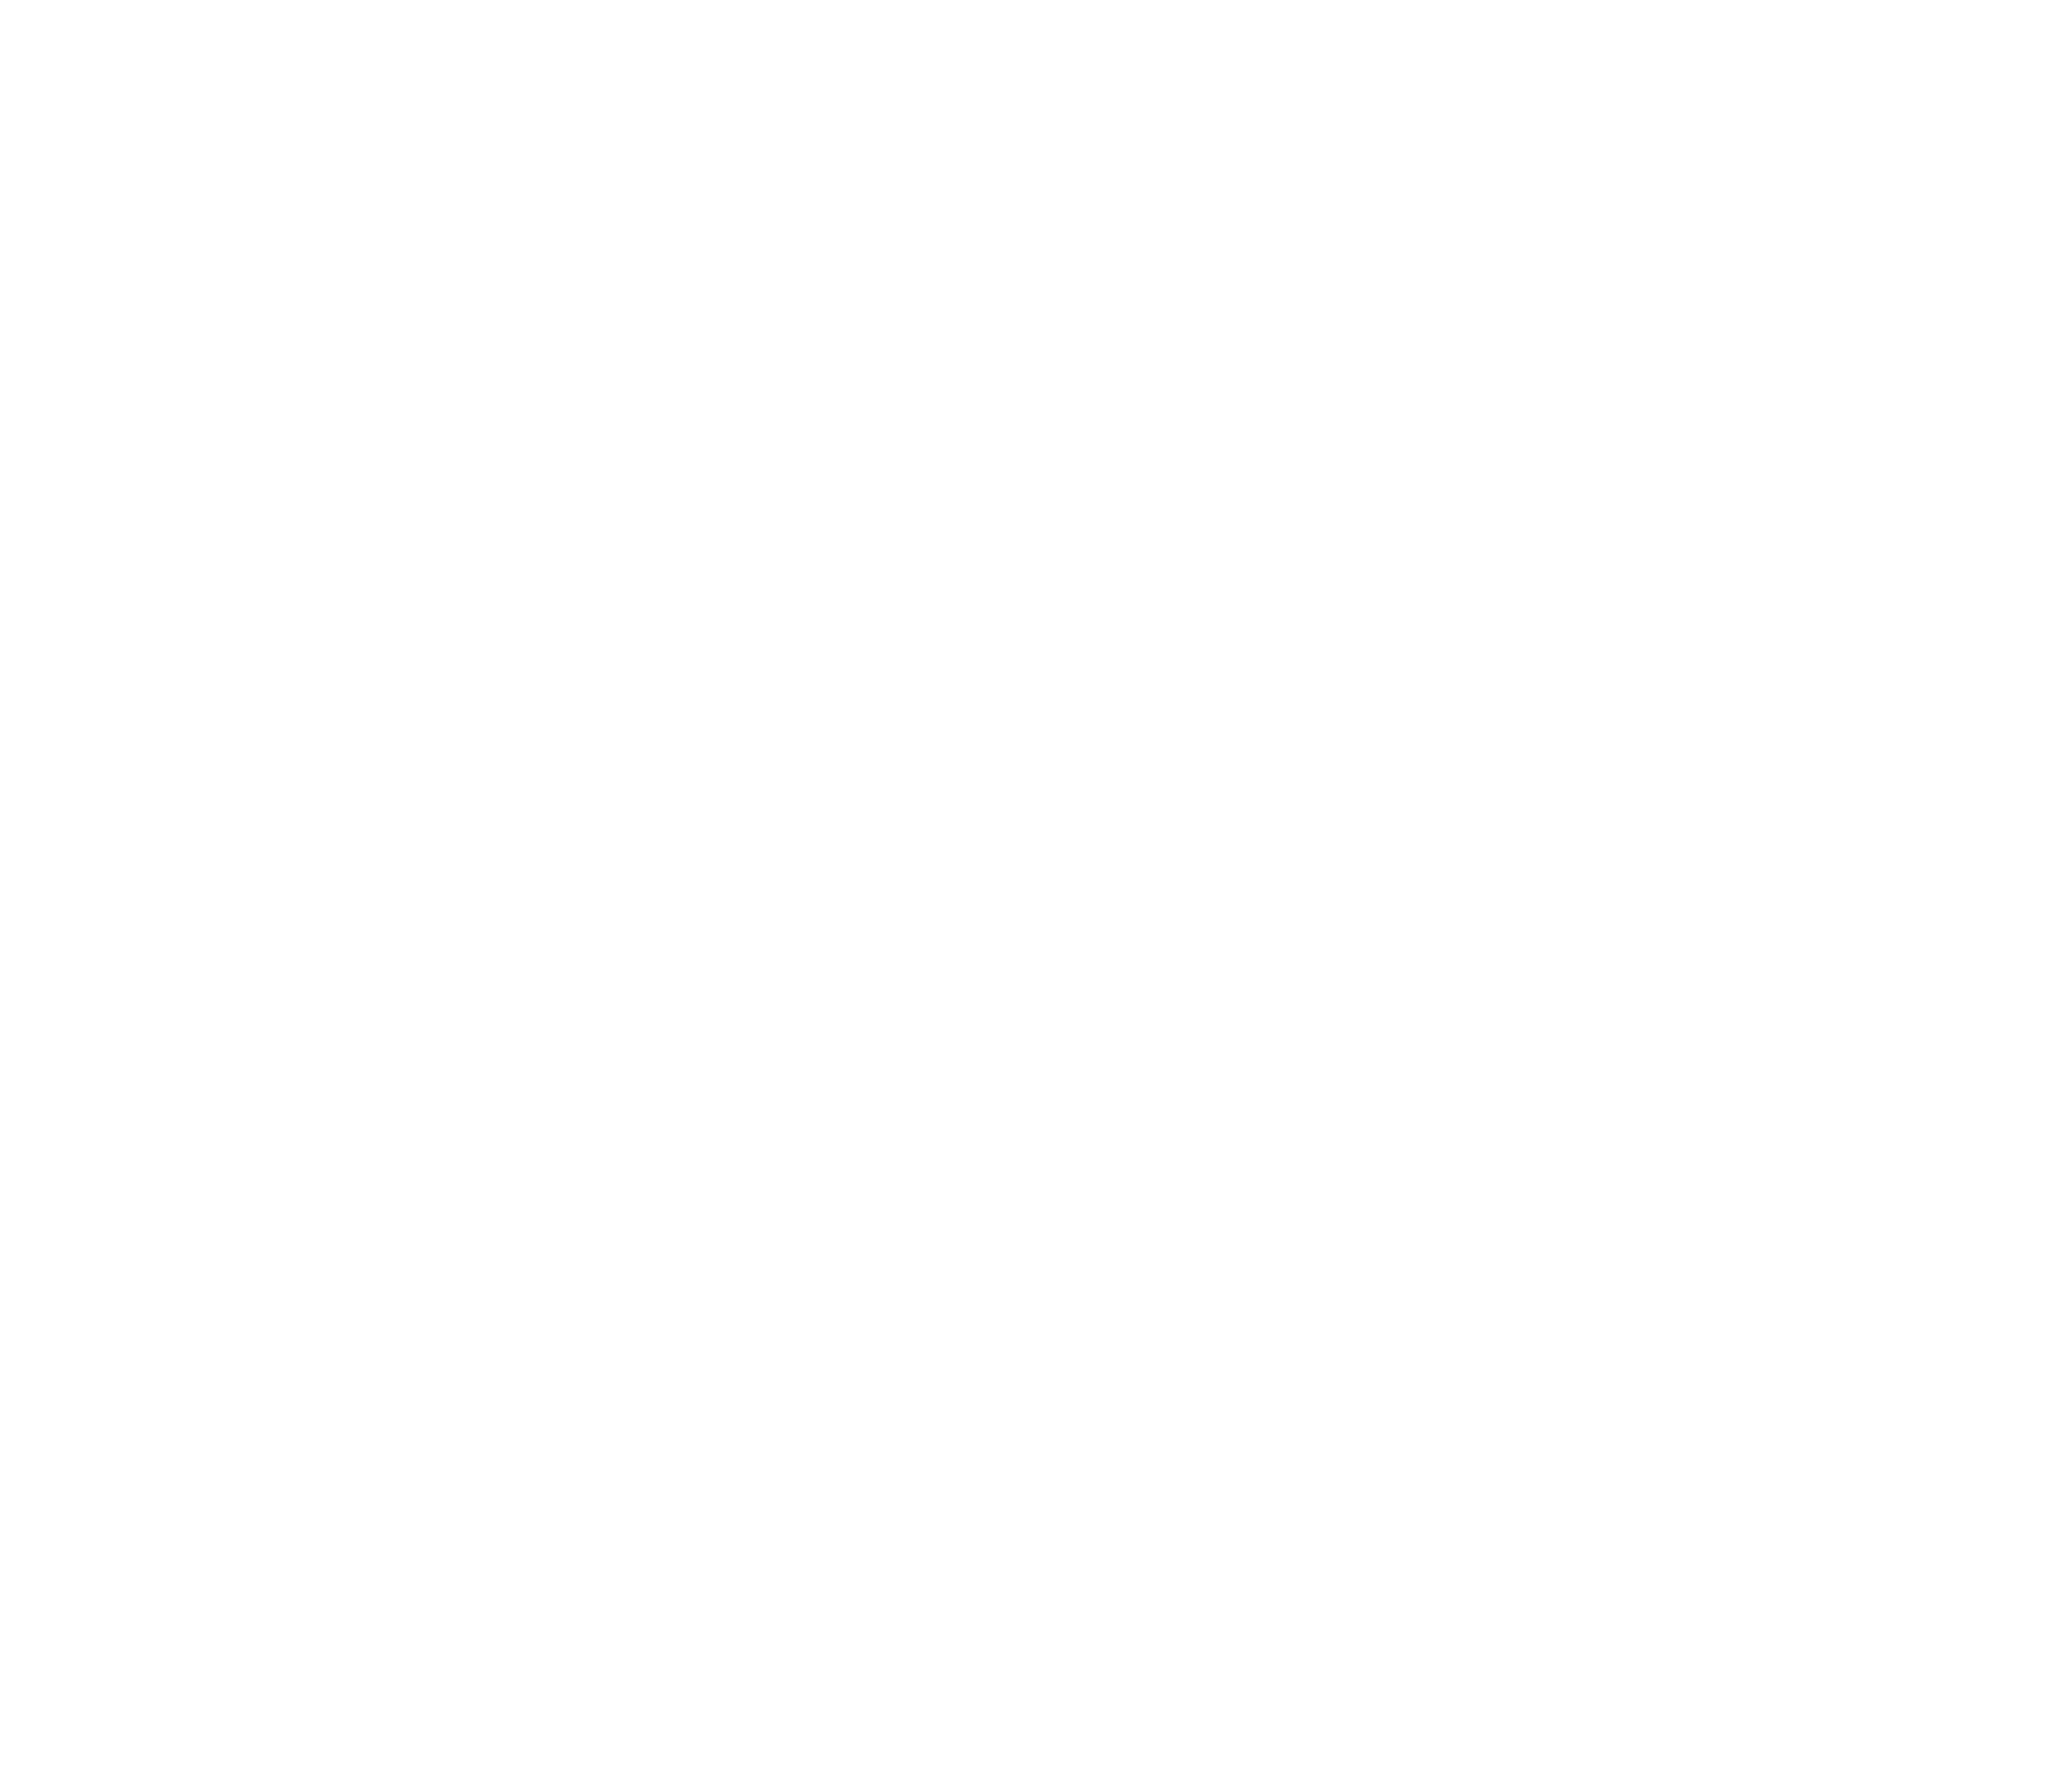 Center for Health Equity Research Logo